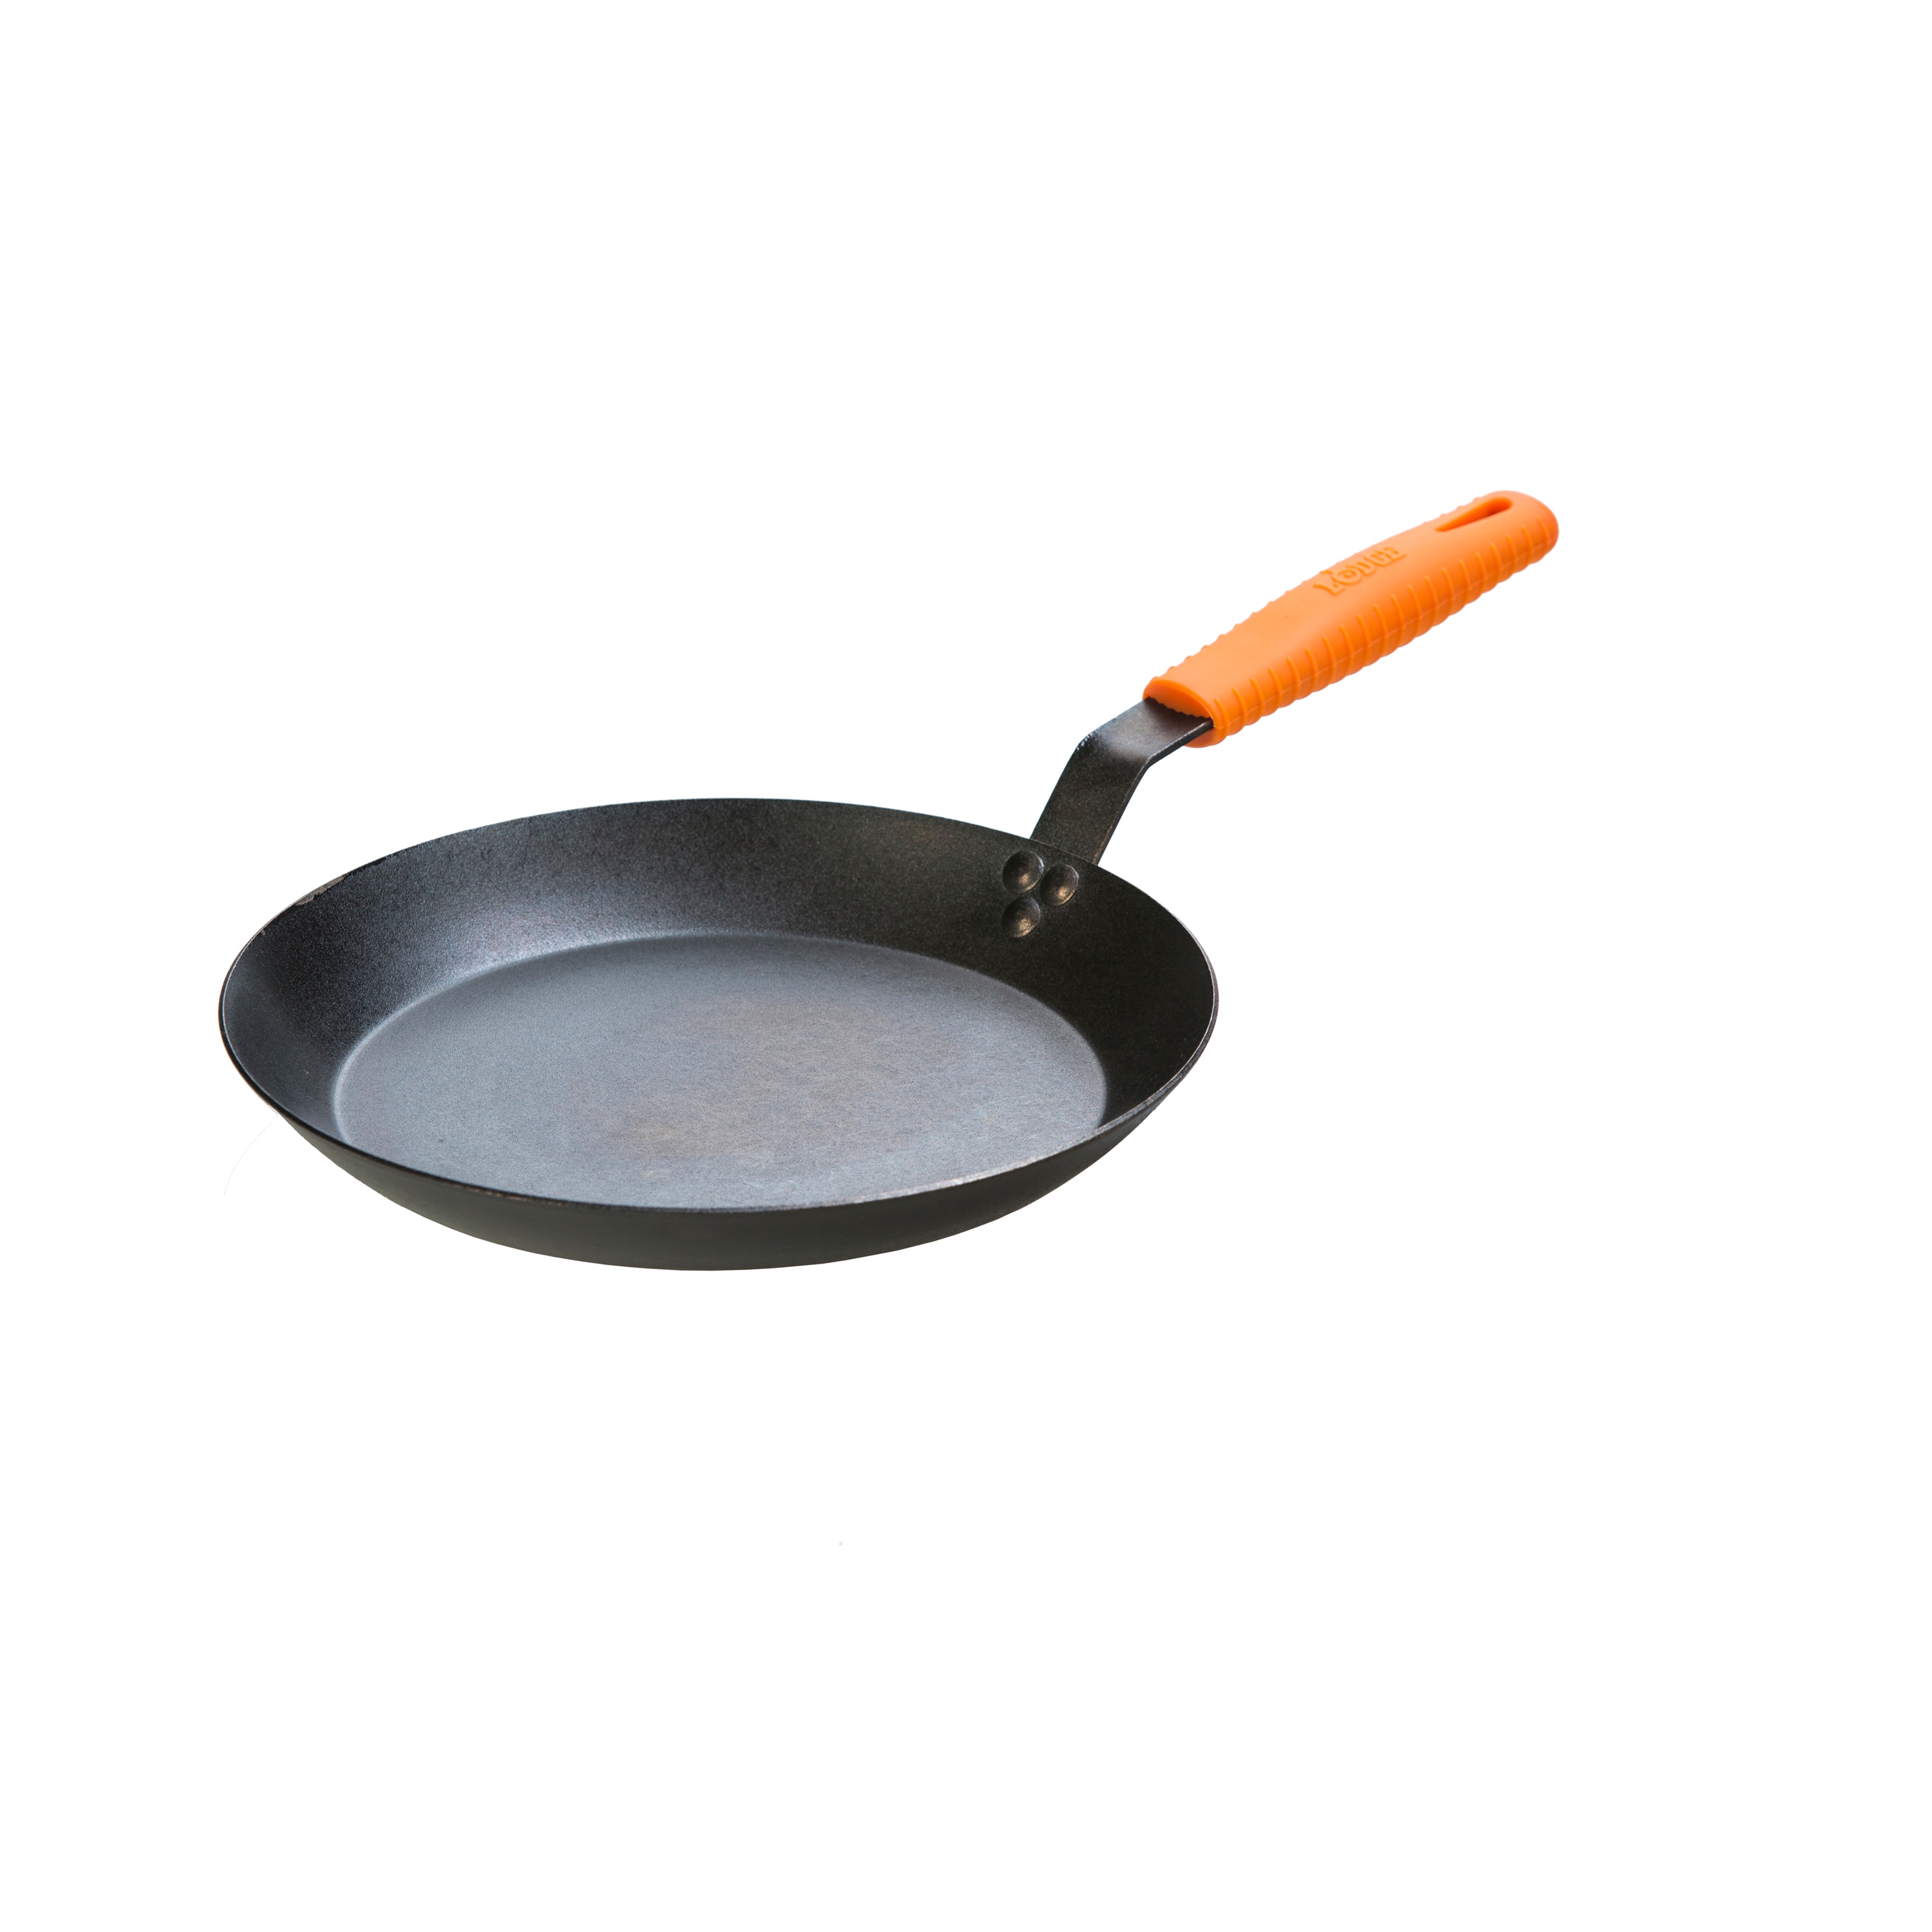 LODGE 12 INCH SEASONED CAST IRON SKILLET WITH HANDLE (SILICONE